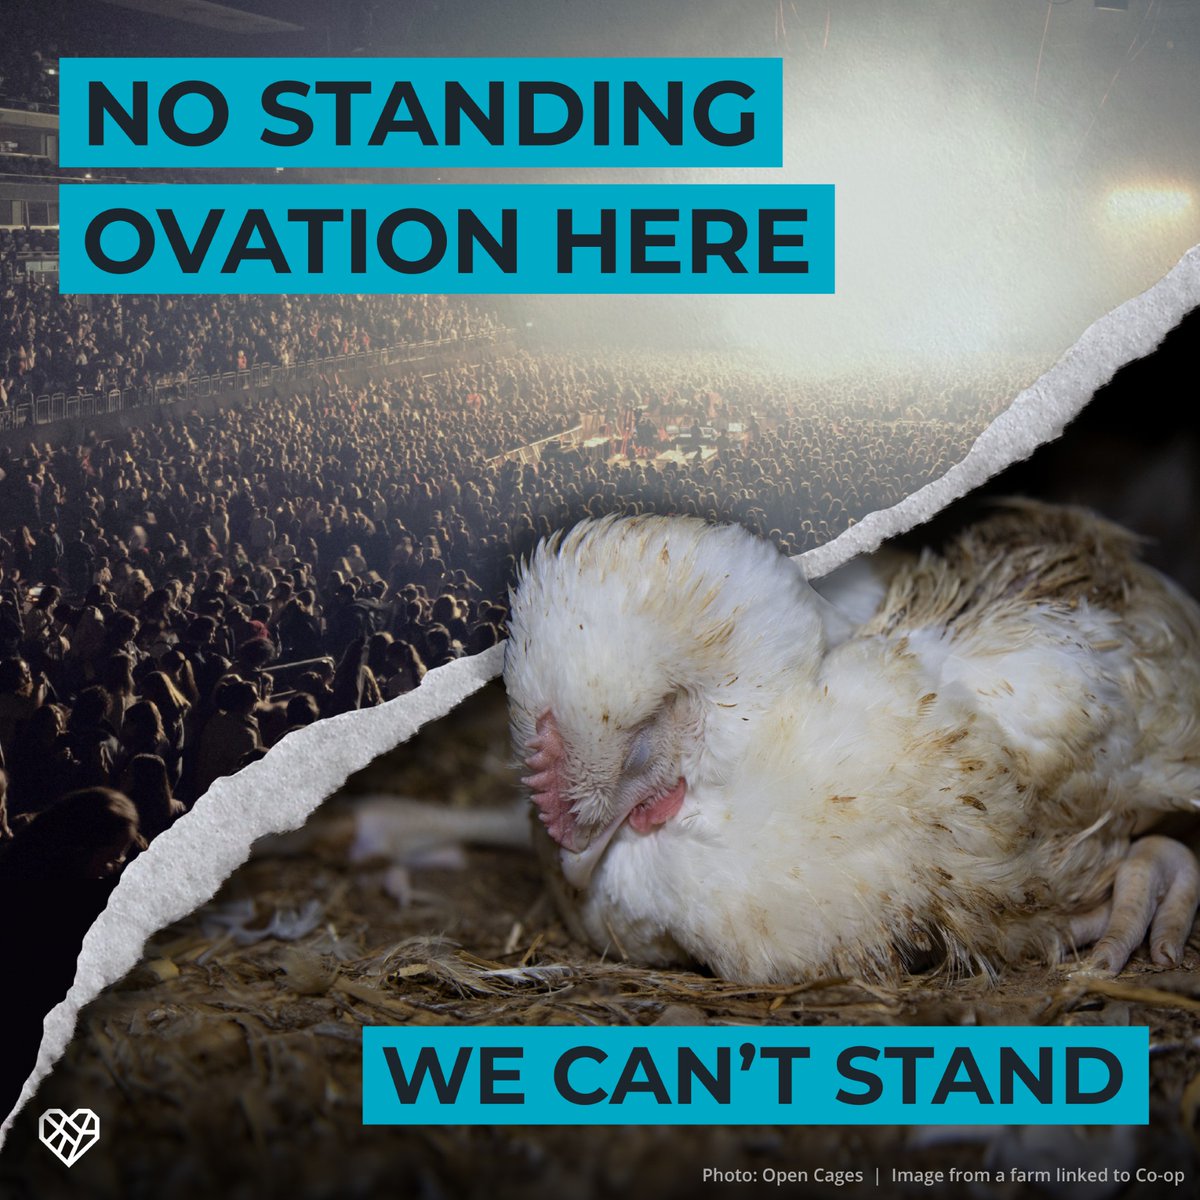 The @coopuk has put hundreds of millions into UK's biggest indoor arena @TheCoopLive, but can't spare any money to get faster-growing chickens out of their supply chain. They must do right by their members & millions of birds. End this unnecessary cruelty now. #CrueltyAtTheCoop